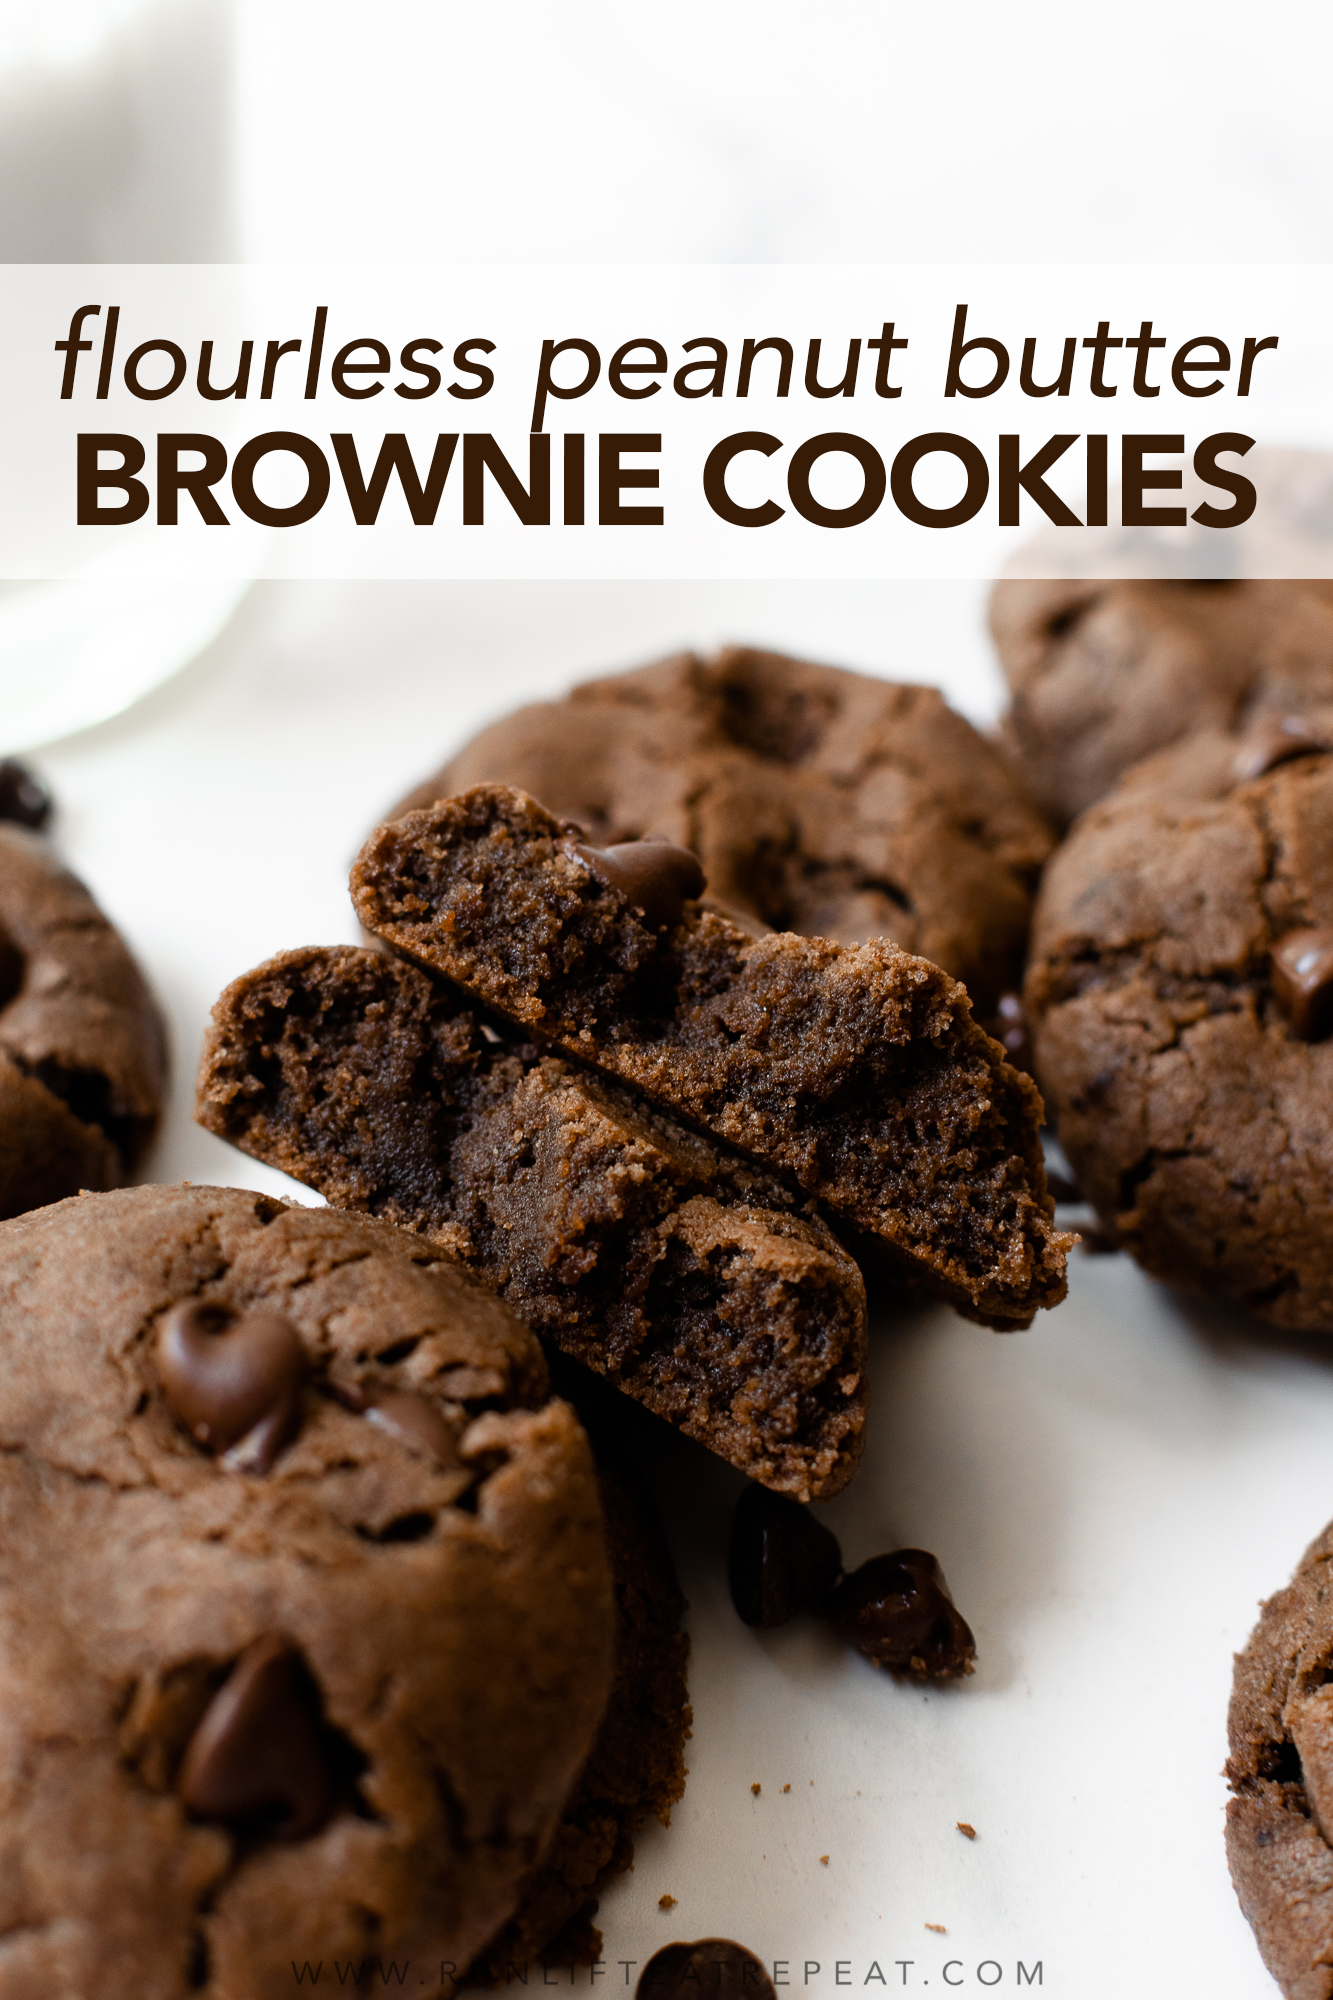 These flourless peanut butter brownie cookies are rich, soft-baked and chewy— that you won't believe that there's no flour or butter! With just 8 ingredients and no chilling, you'll find any excuse to make them. I recommend using mini chocolate chips to pack more into each cookie.